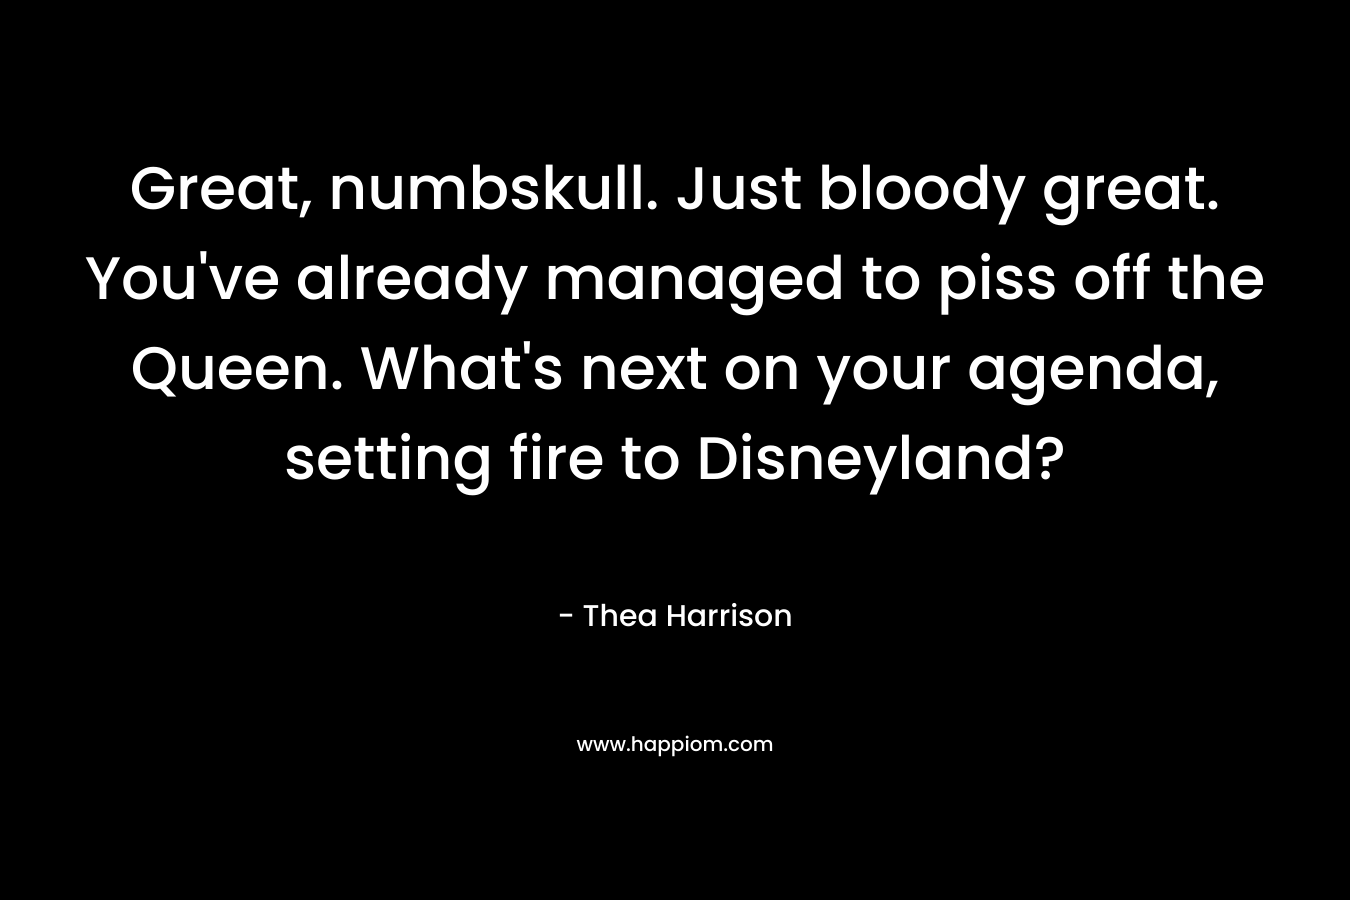 Great, numbskull. Just bloody great. You’ve already managed to piss off the Queen. What’s next on your agenda, setting fire to Disneyland? – Thea Harrison